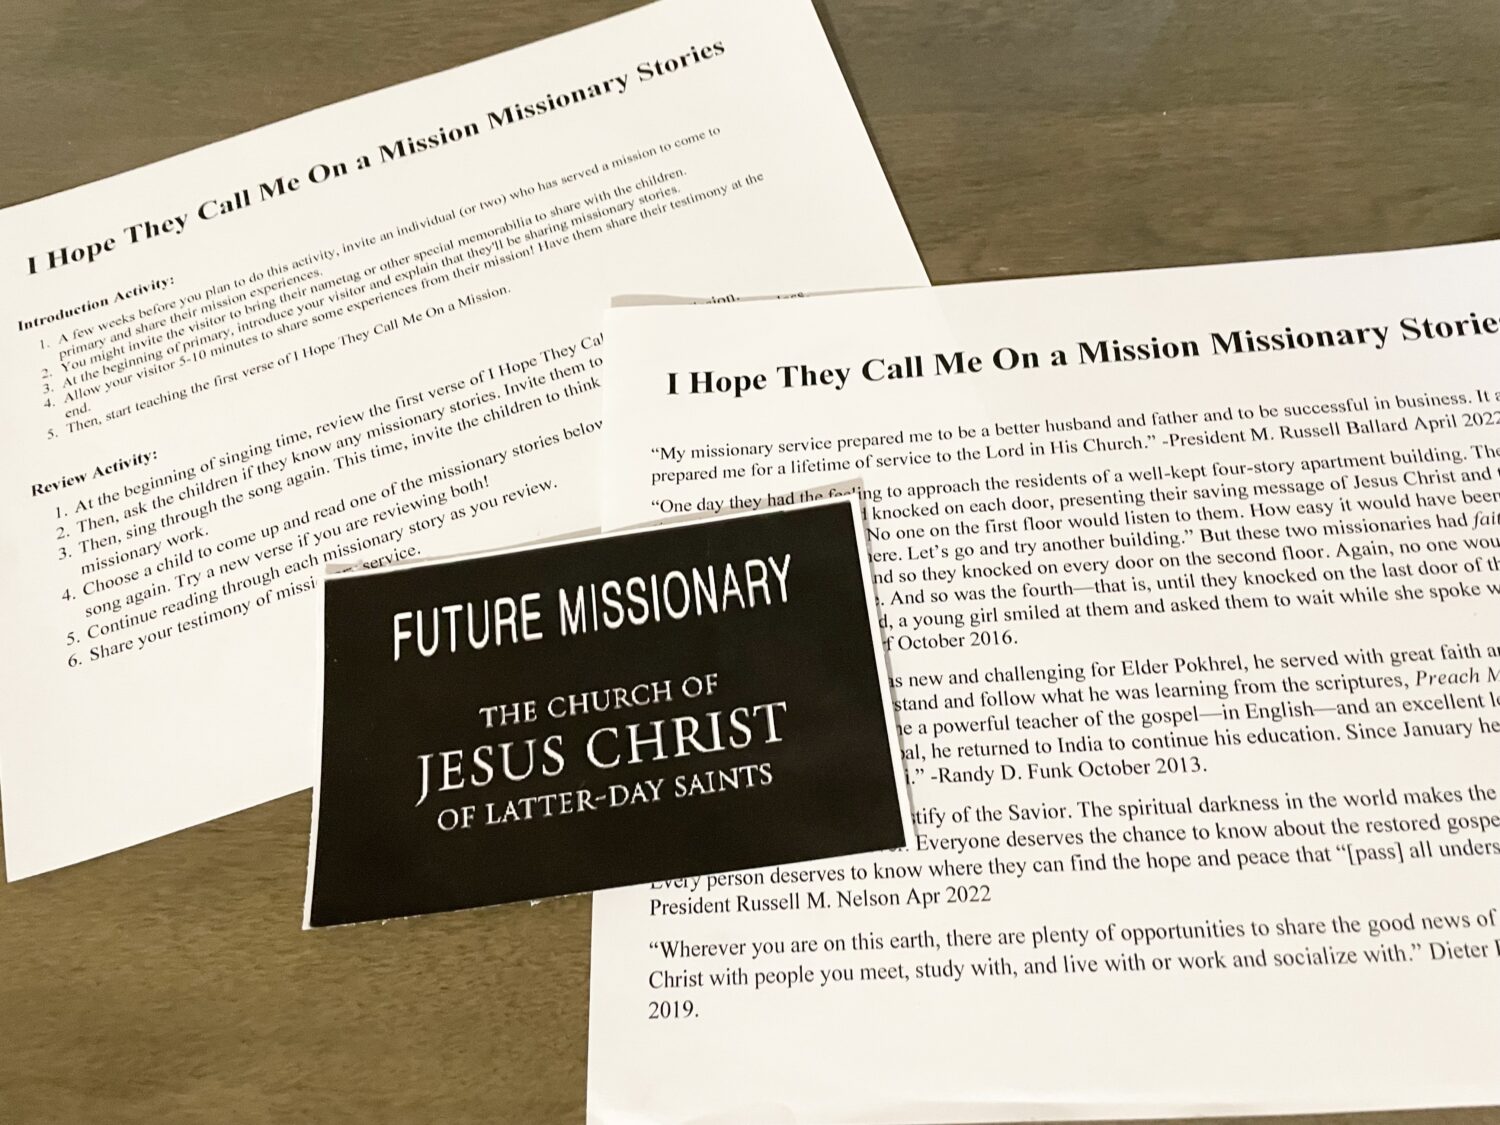 I Hope They Call Me on a Mission - Missionary Stories singing time idea for LDS Primary Music Leaders! Fun and easy idea to bring the song to life for LDS Primary Music Leaders.